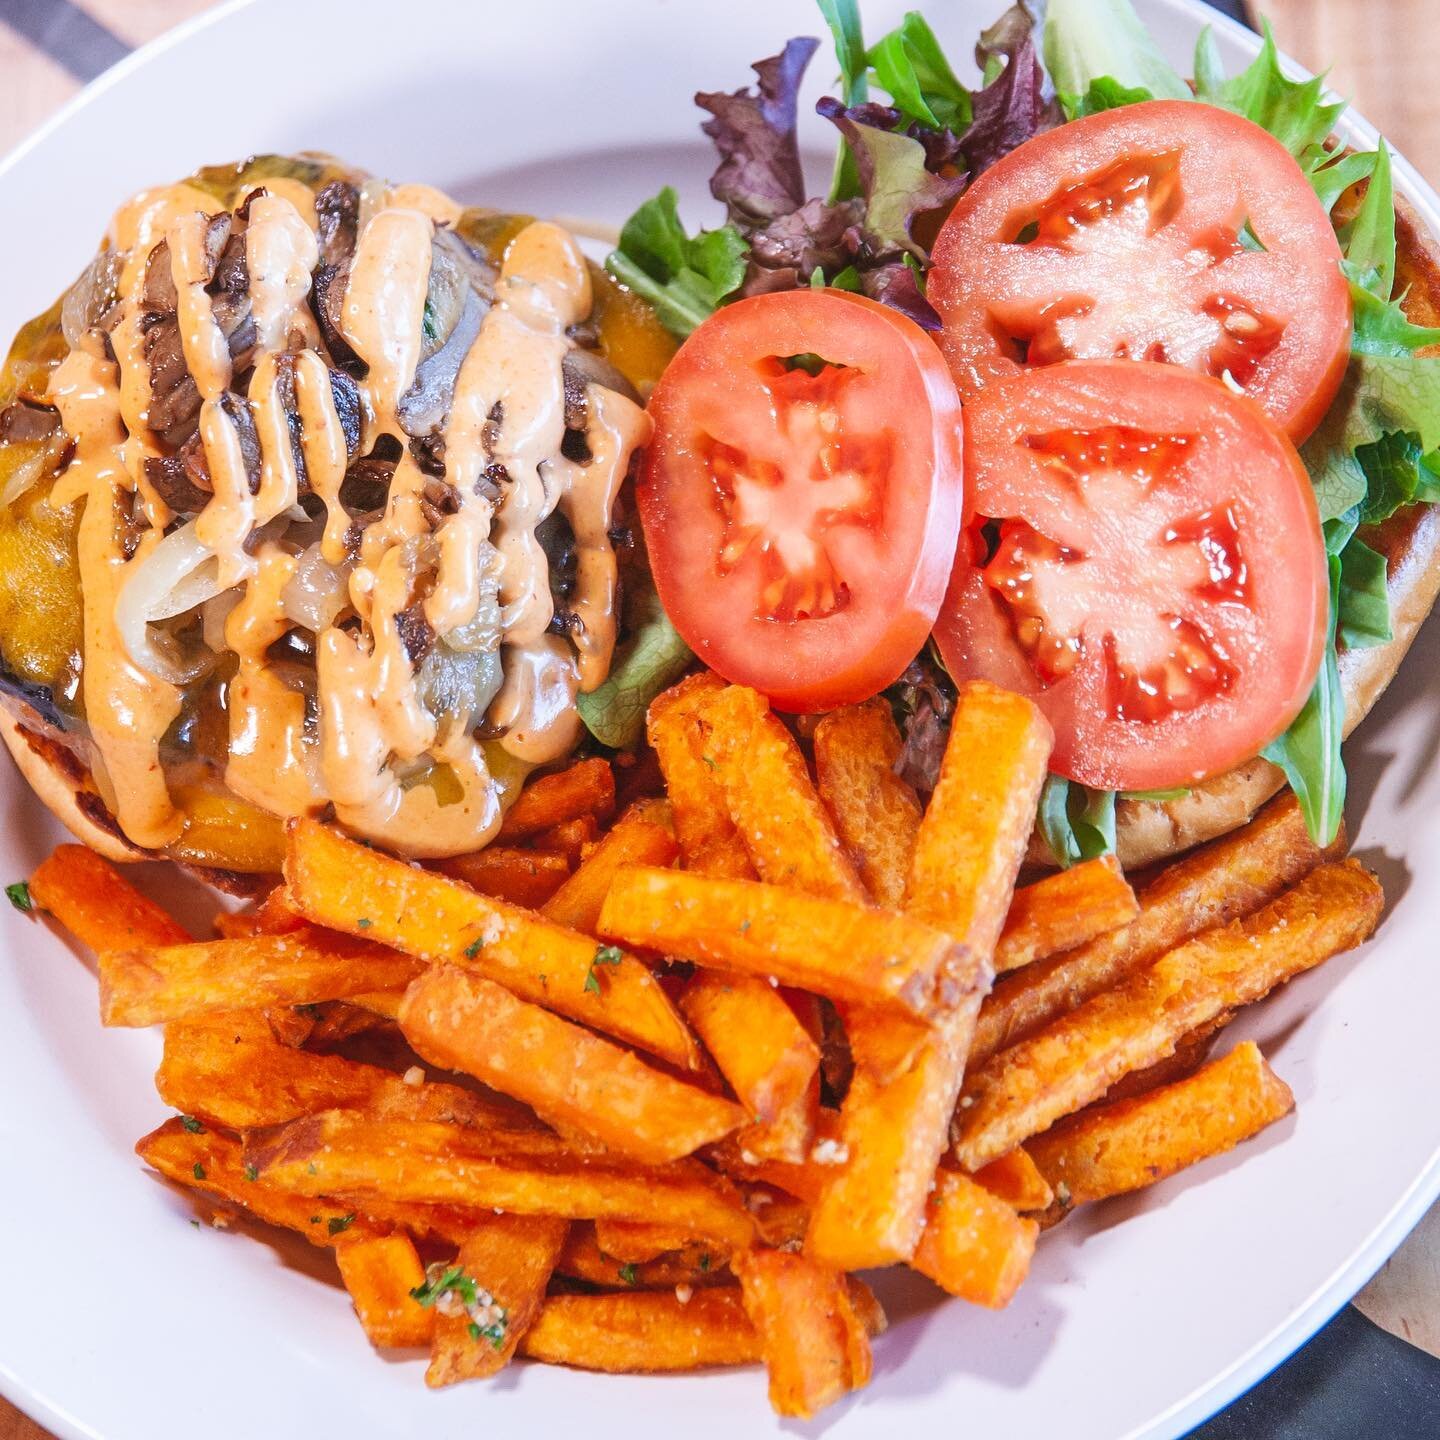 Spice up your week with our sizzling special: The Jerk Turkey Burger! 🍔Dive into a succulent 1/2 lb Spicy Jerk Turkey Patty, topped with Smothered Onions &amp; Mushrooms, Lettuce, Tomatoes, Sharp Cheddar Cheese, Chipotle Mayo, and a side of Garlic F